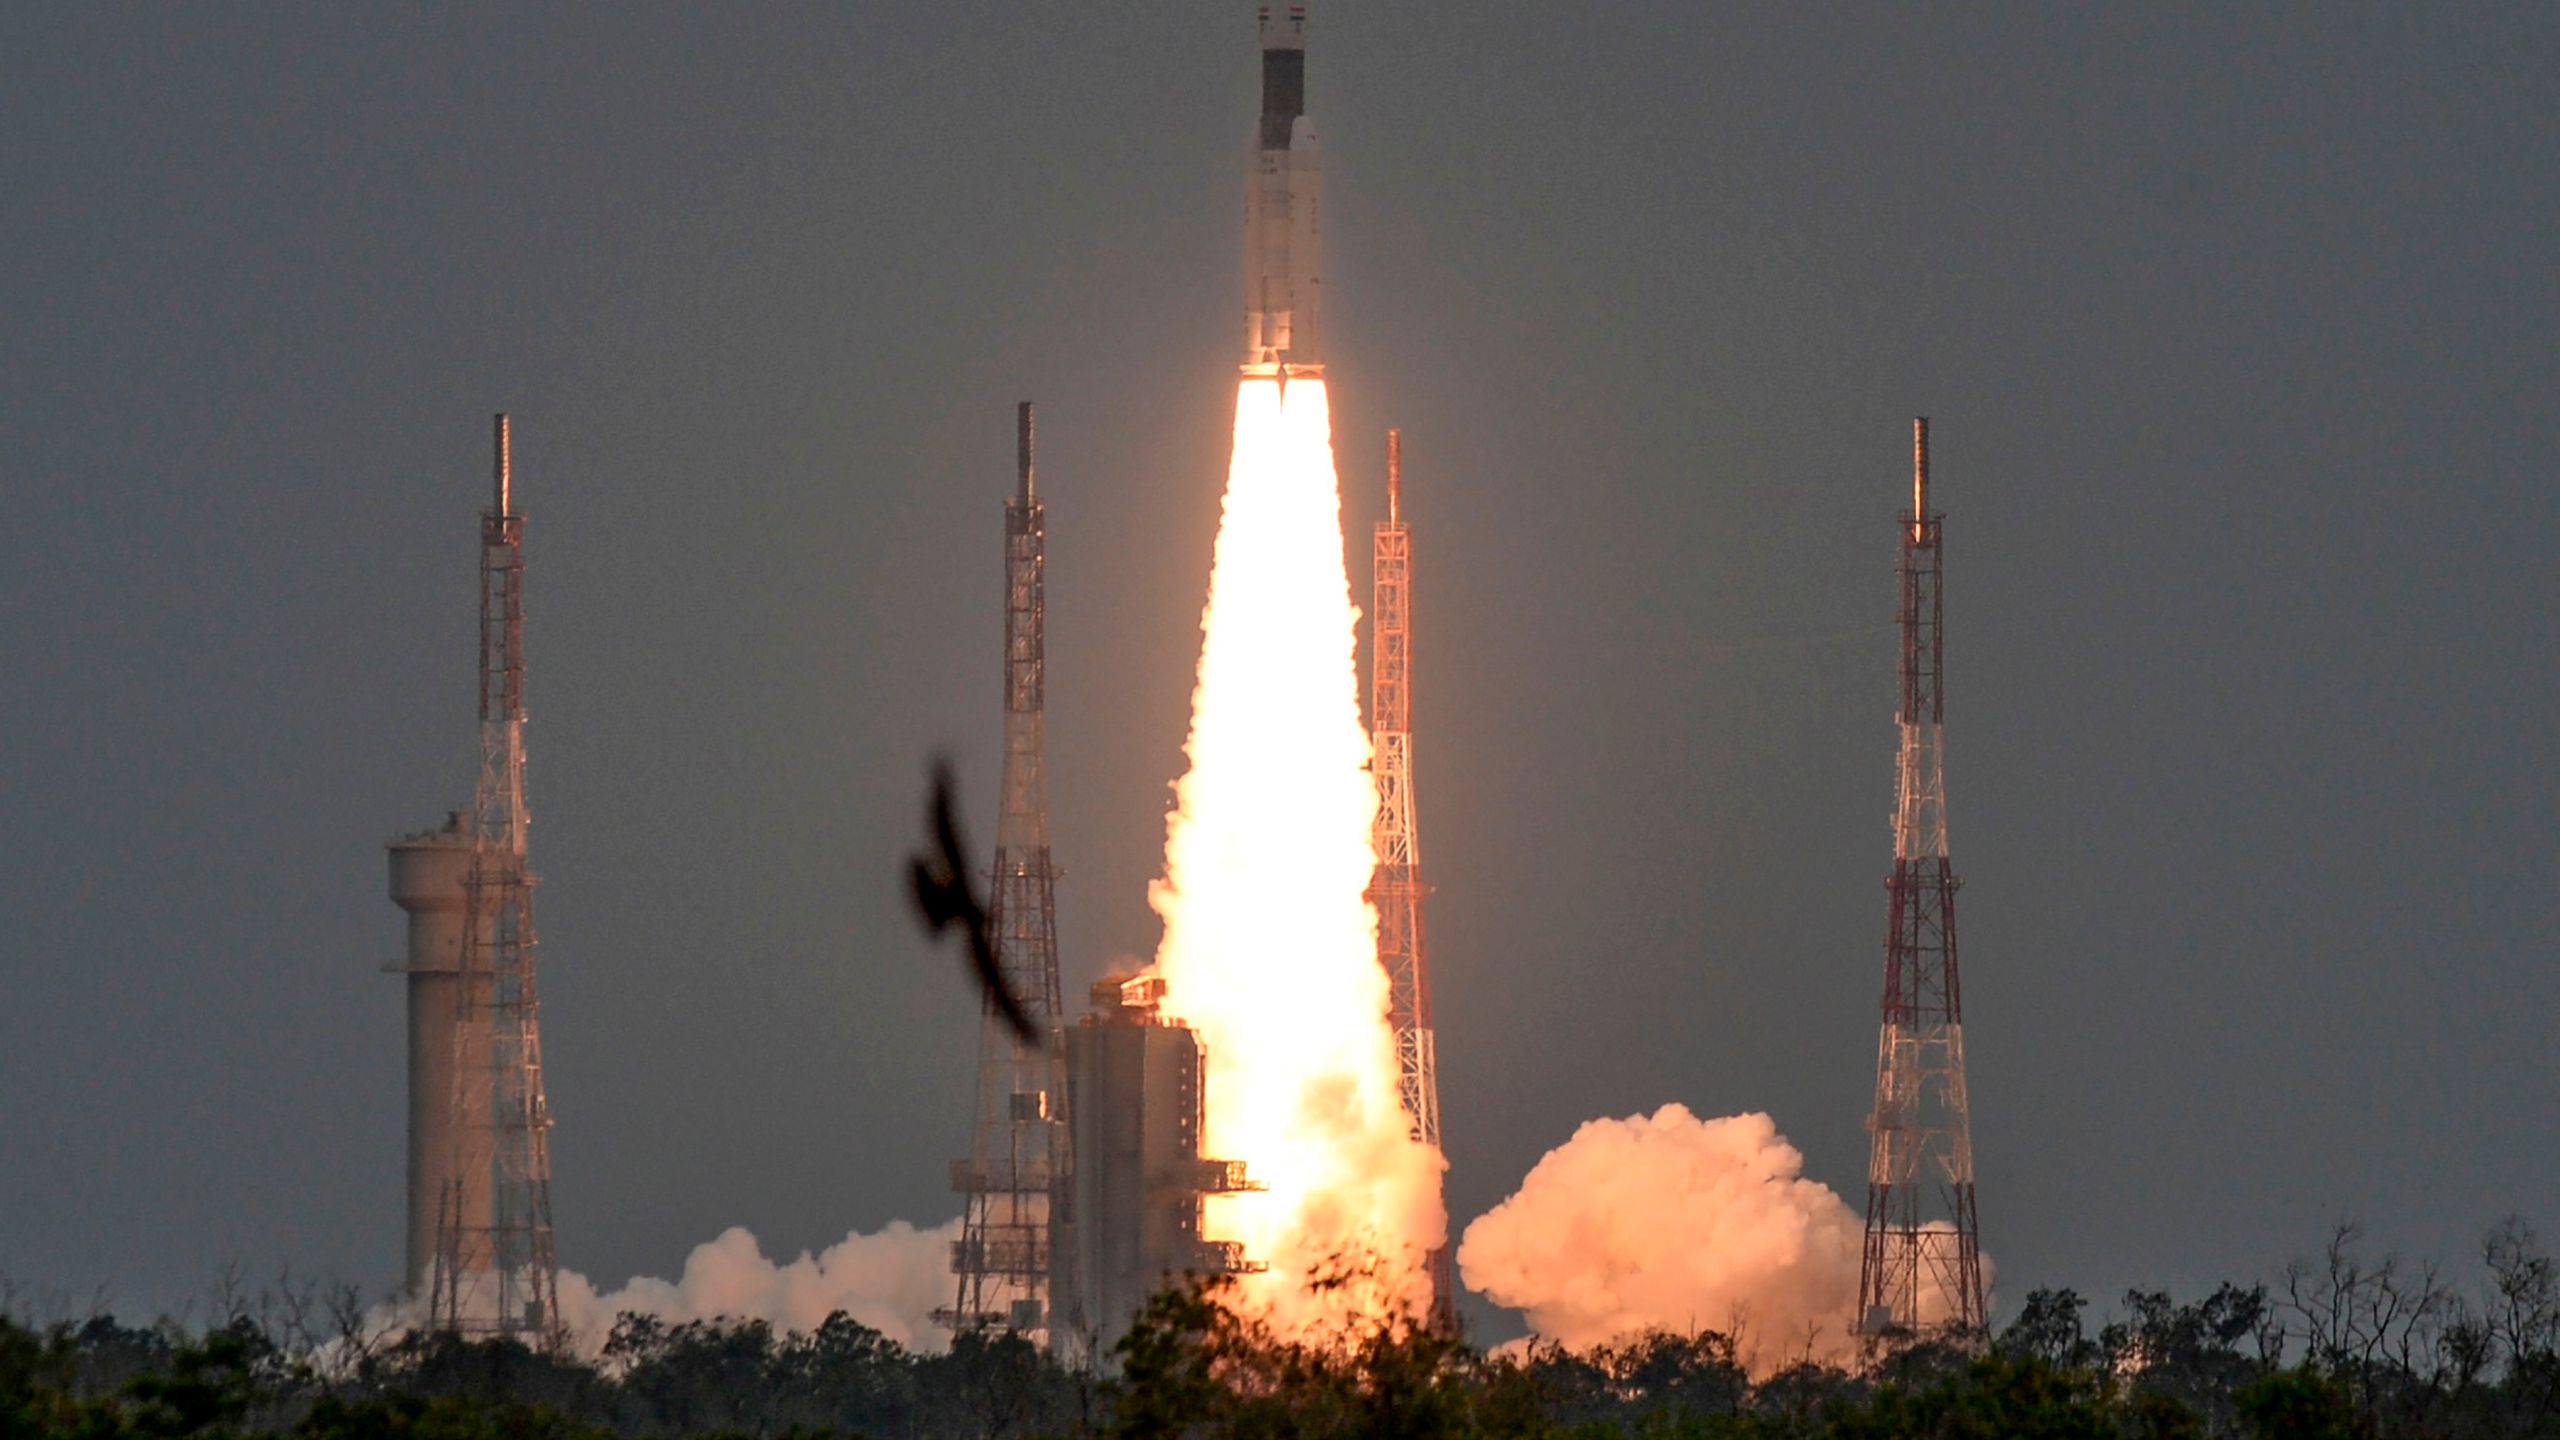 India Launches Spacecraft to Explore Water Deposits on Moon